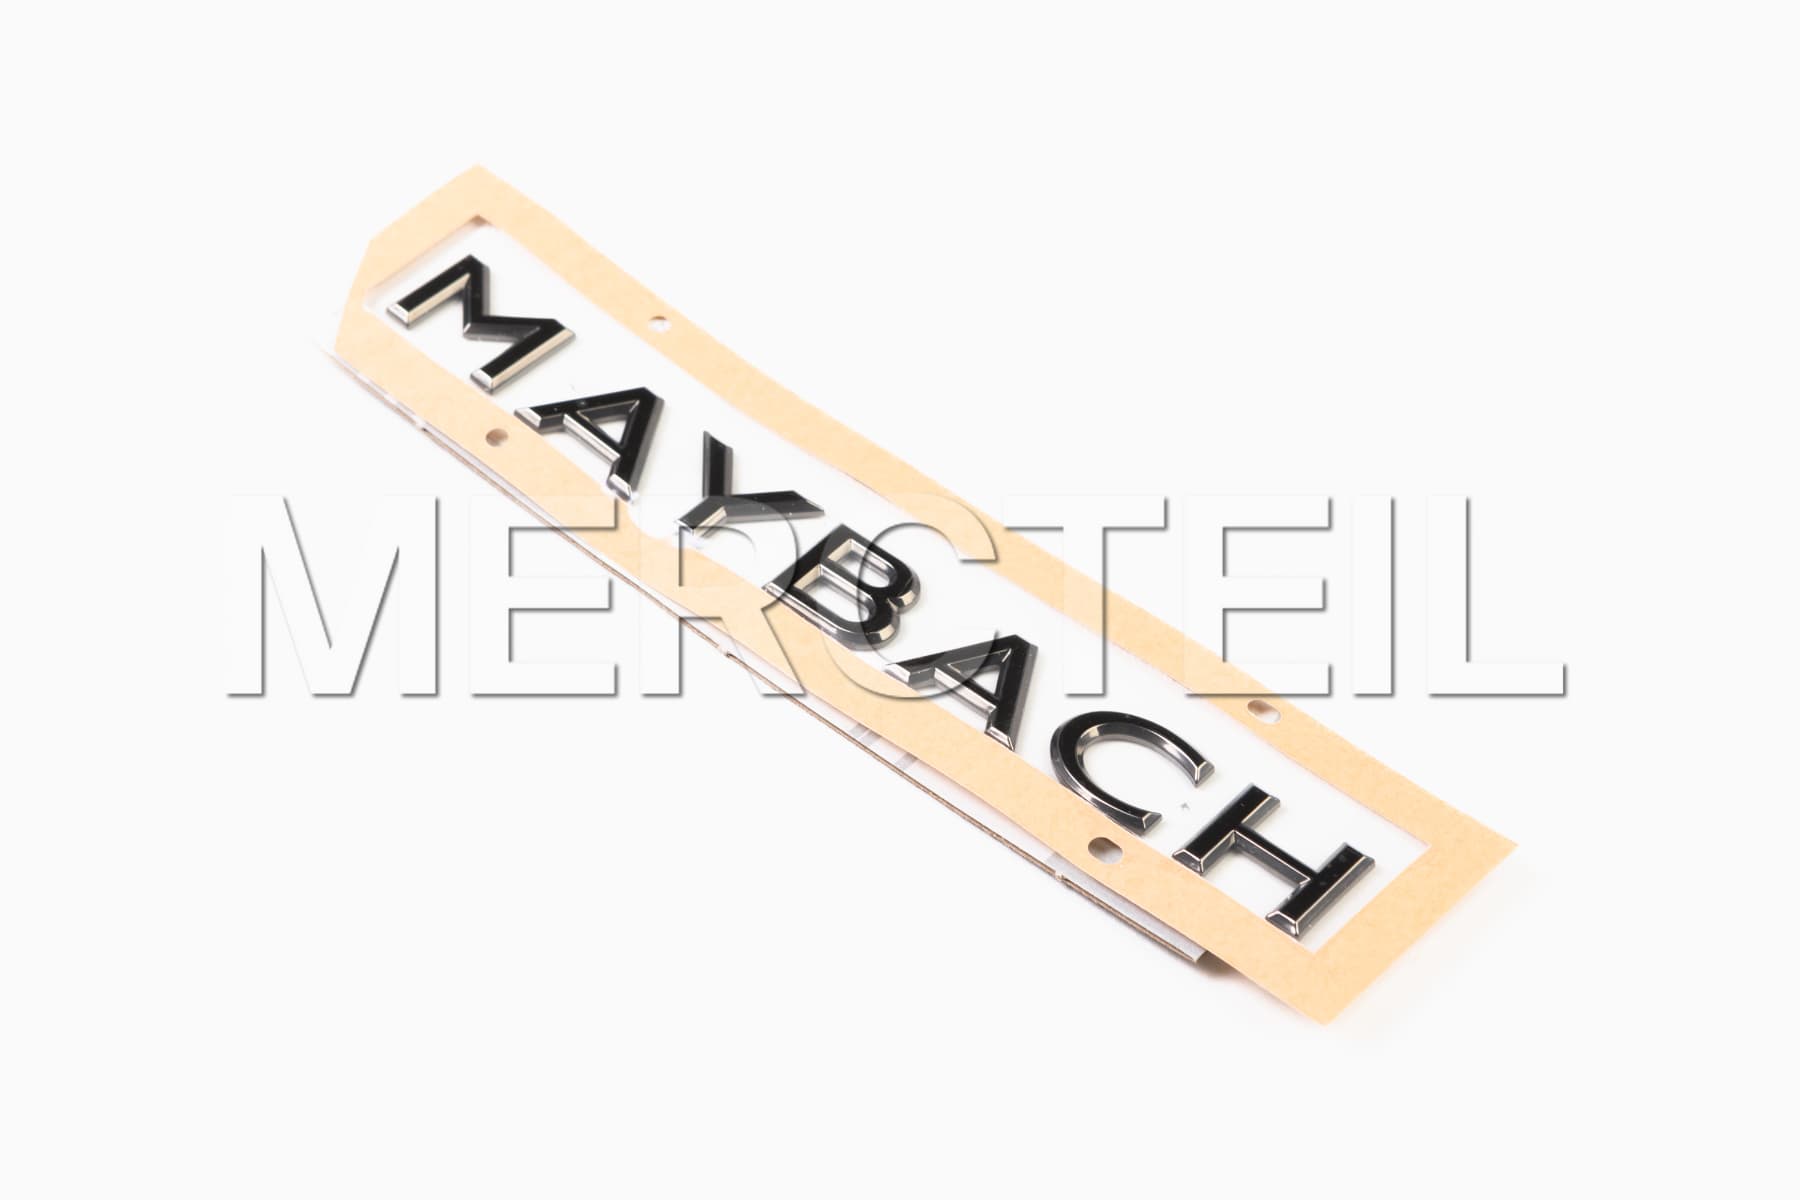 Night Series Maybach Logo Black Chrome Lettering Genuine Mercedes-Maybach  (Part number: A2238176700)